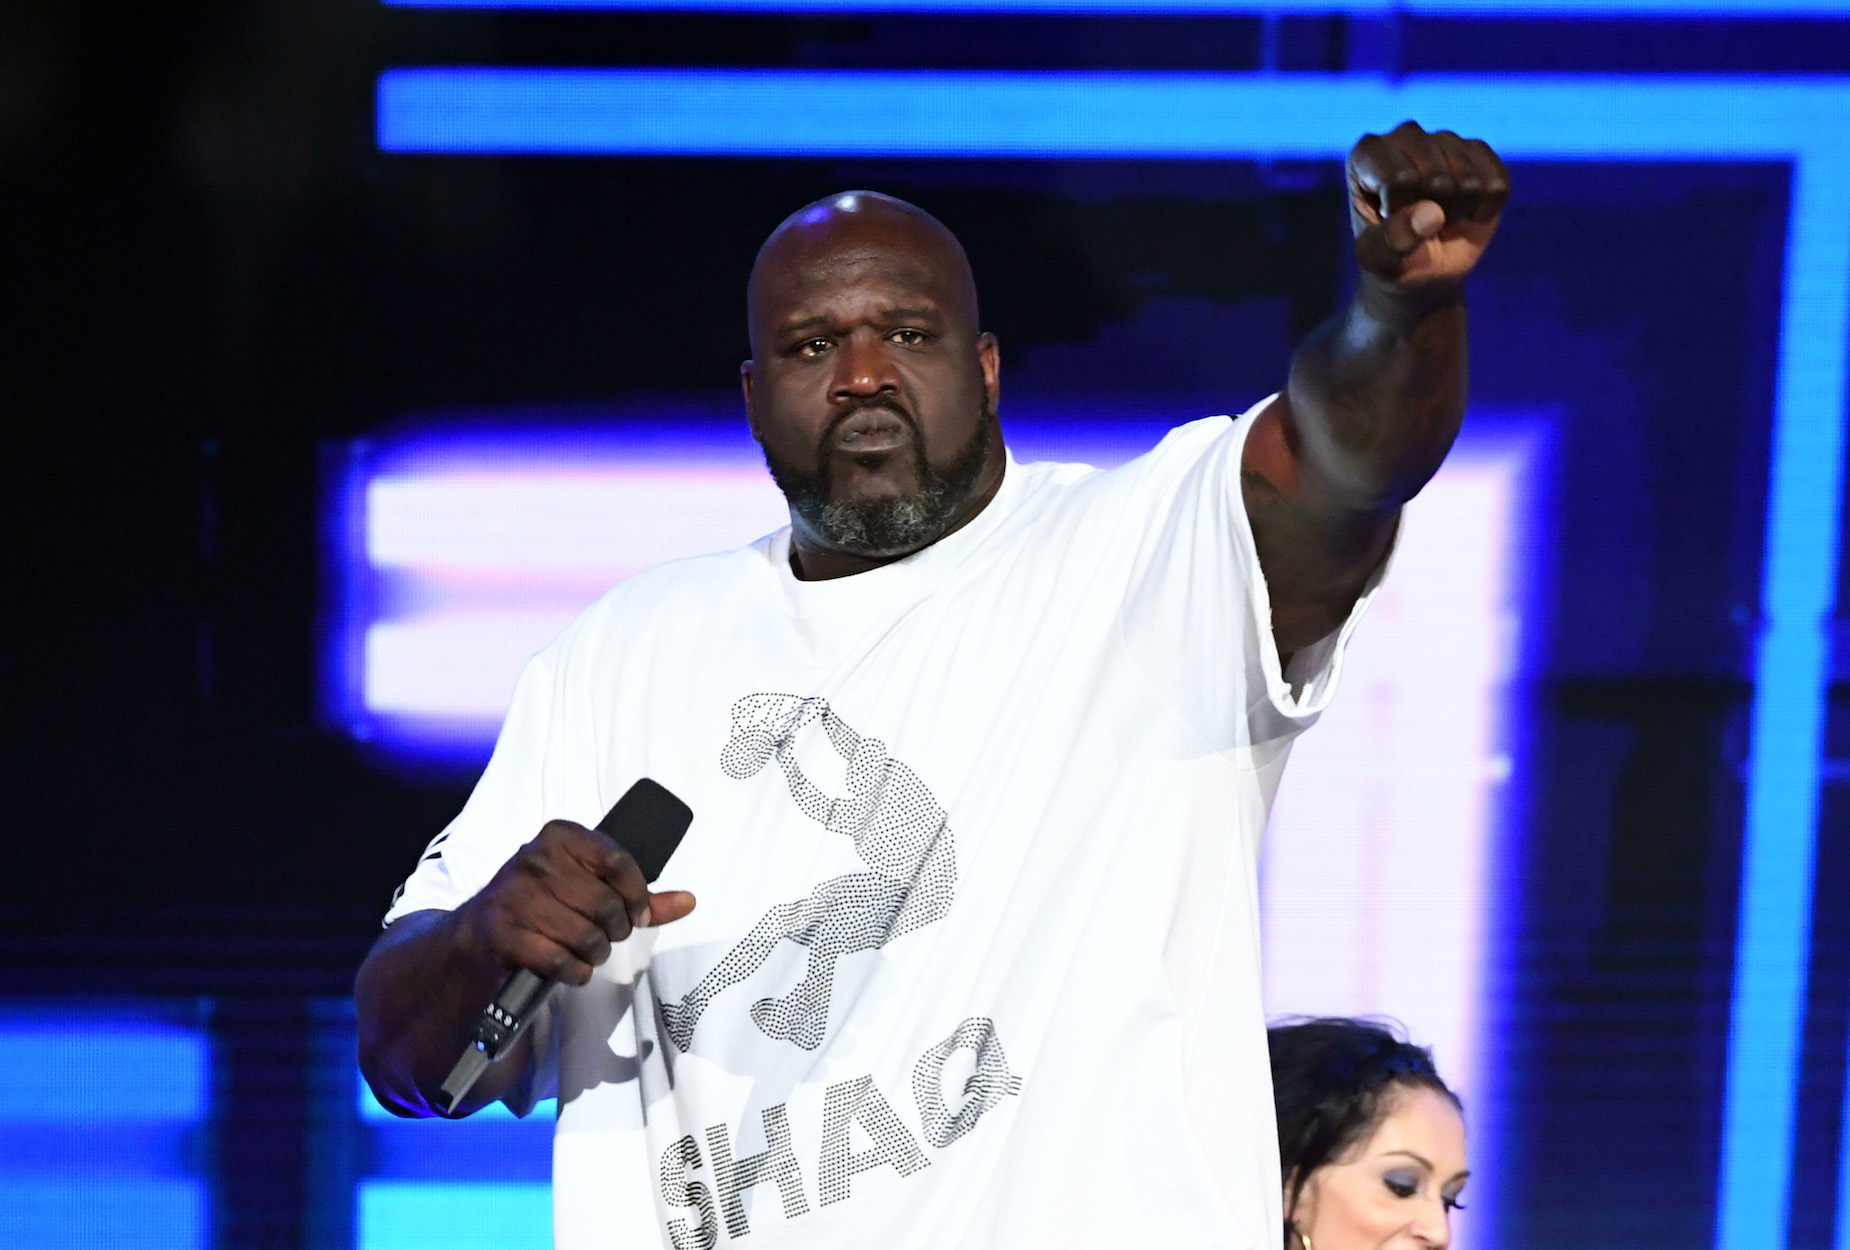 Shaquille O'Neal on stage during the 2019 NBA Awards.